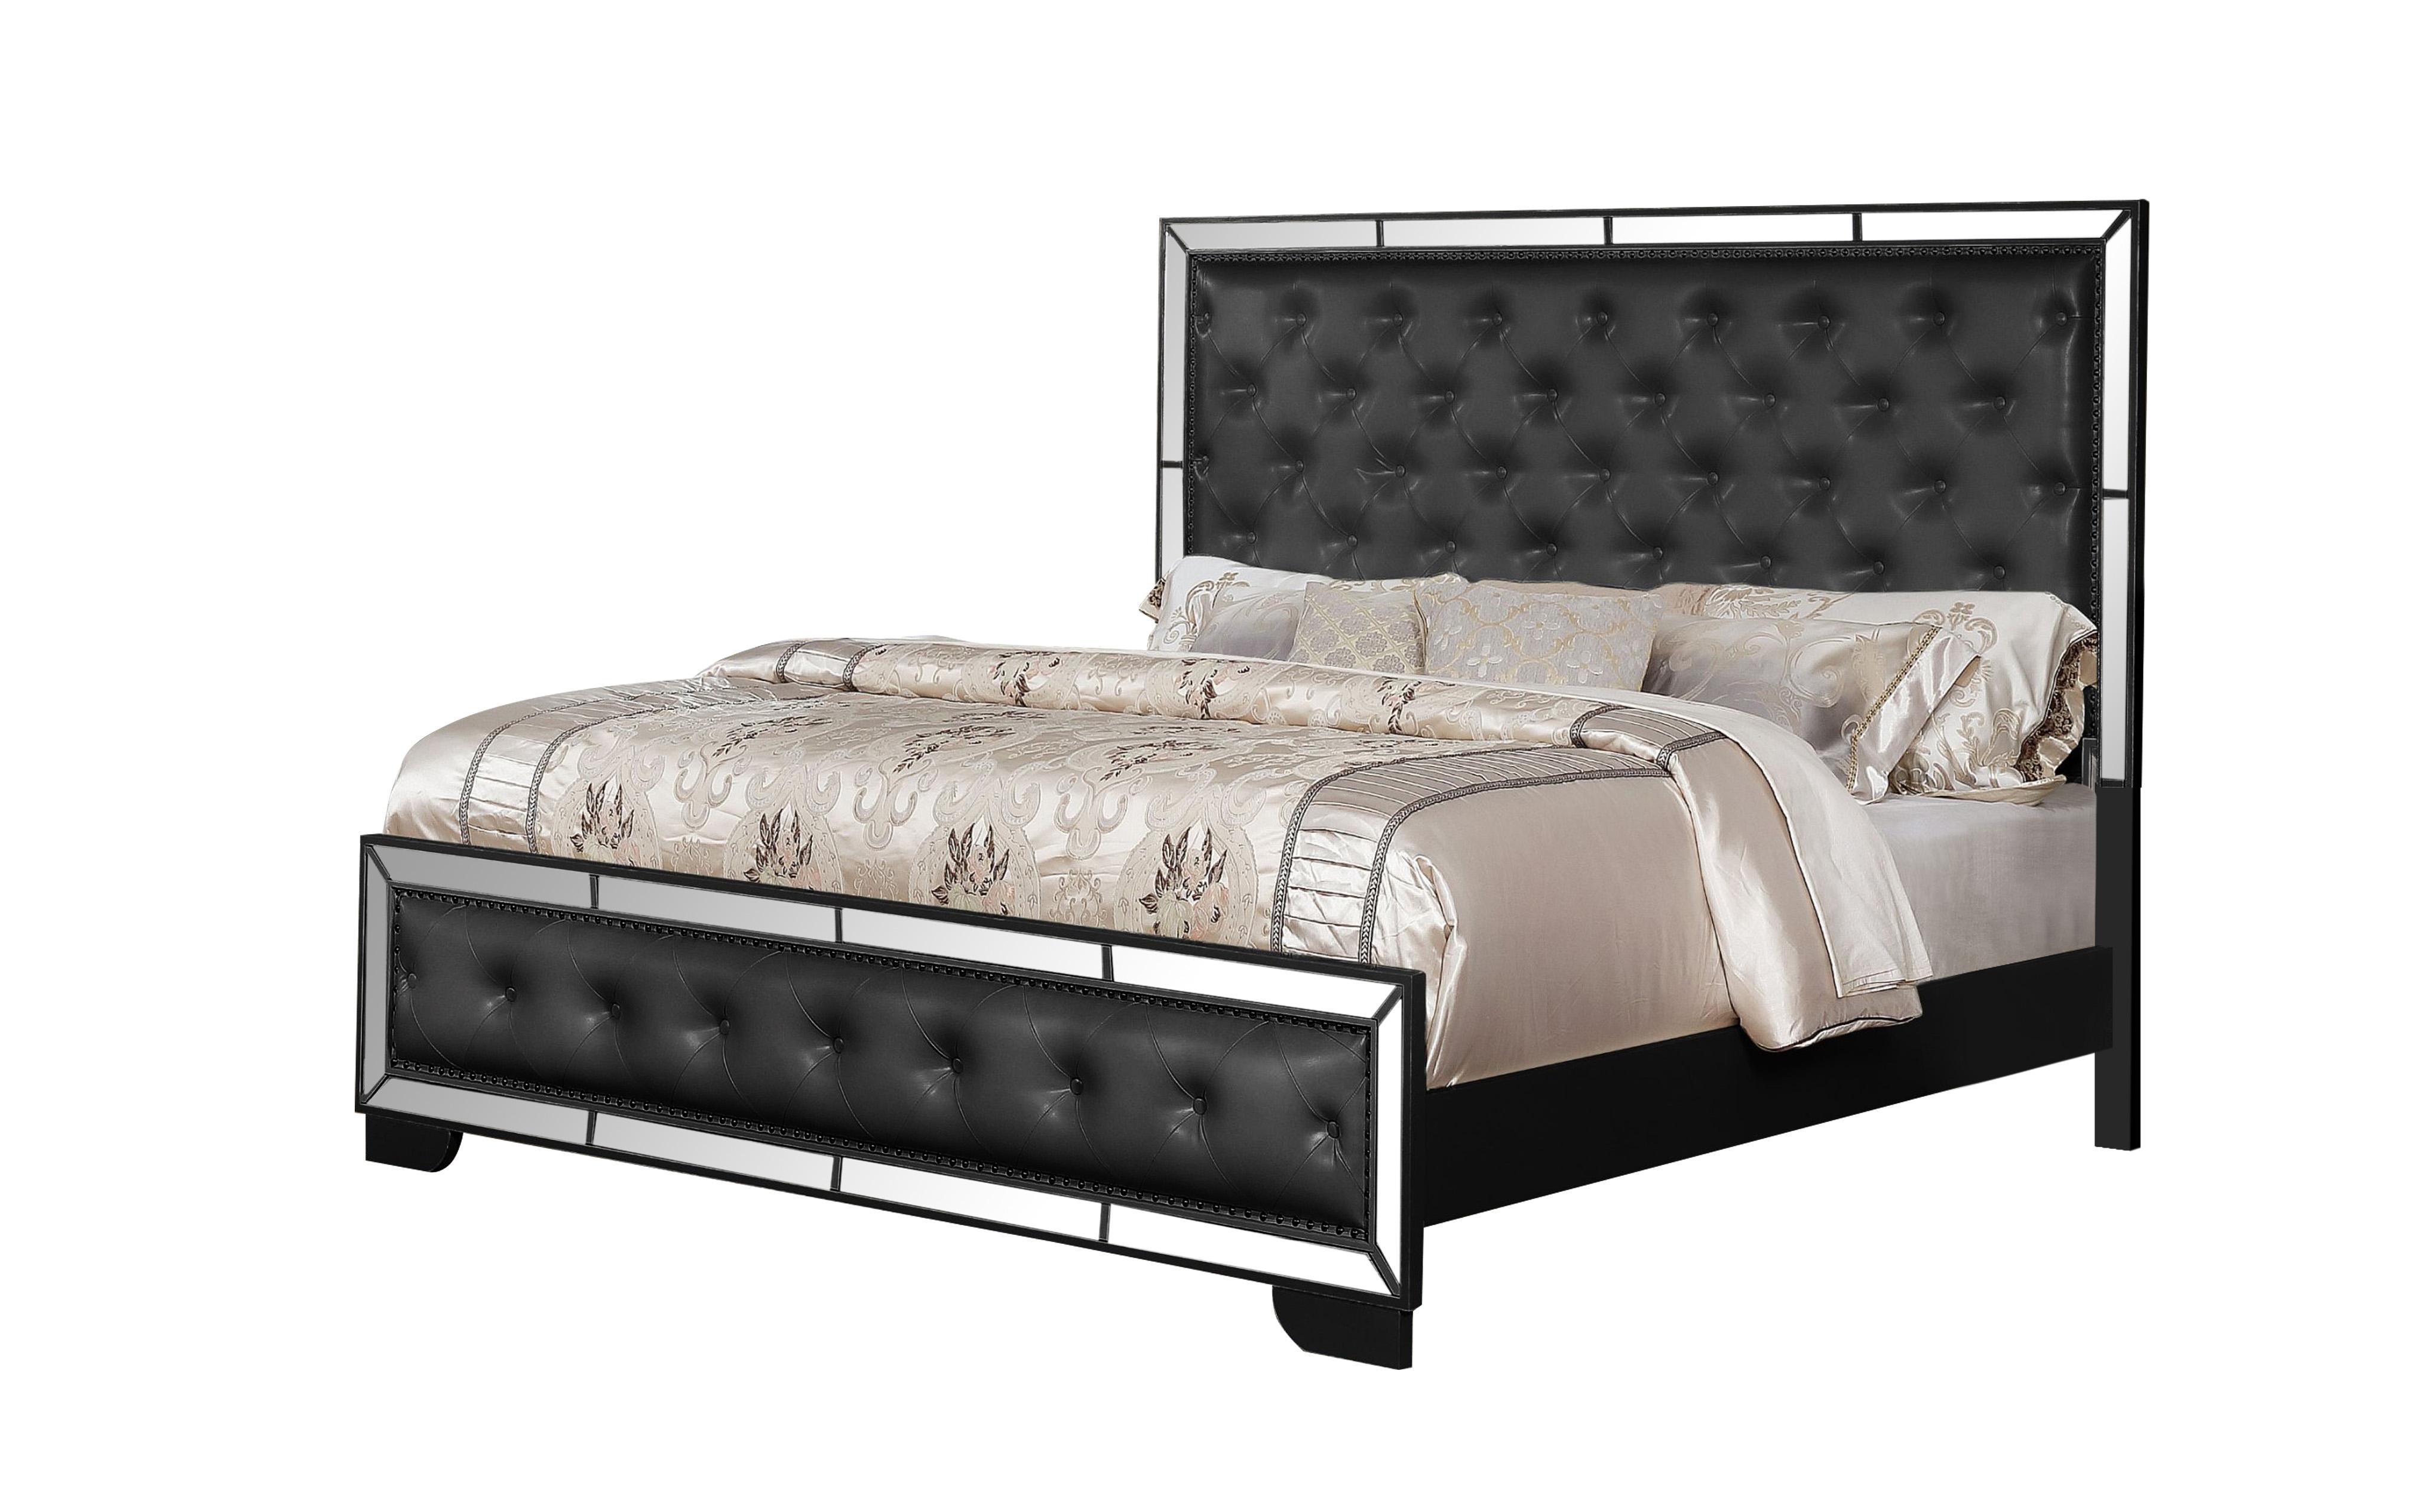 

    
Glam Black & Mirrored Inlays Button Tufted Queen Bed MADISON Galaxy Home Modern
